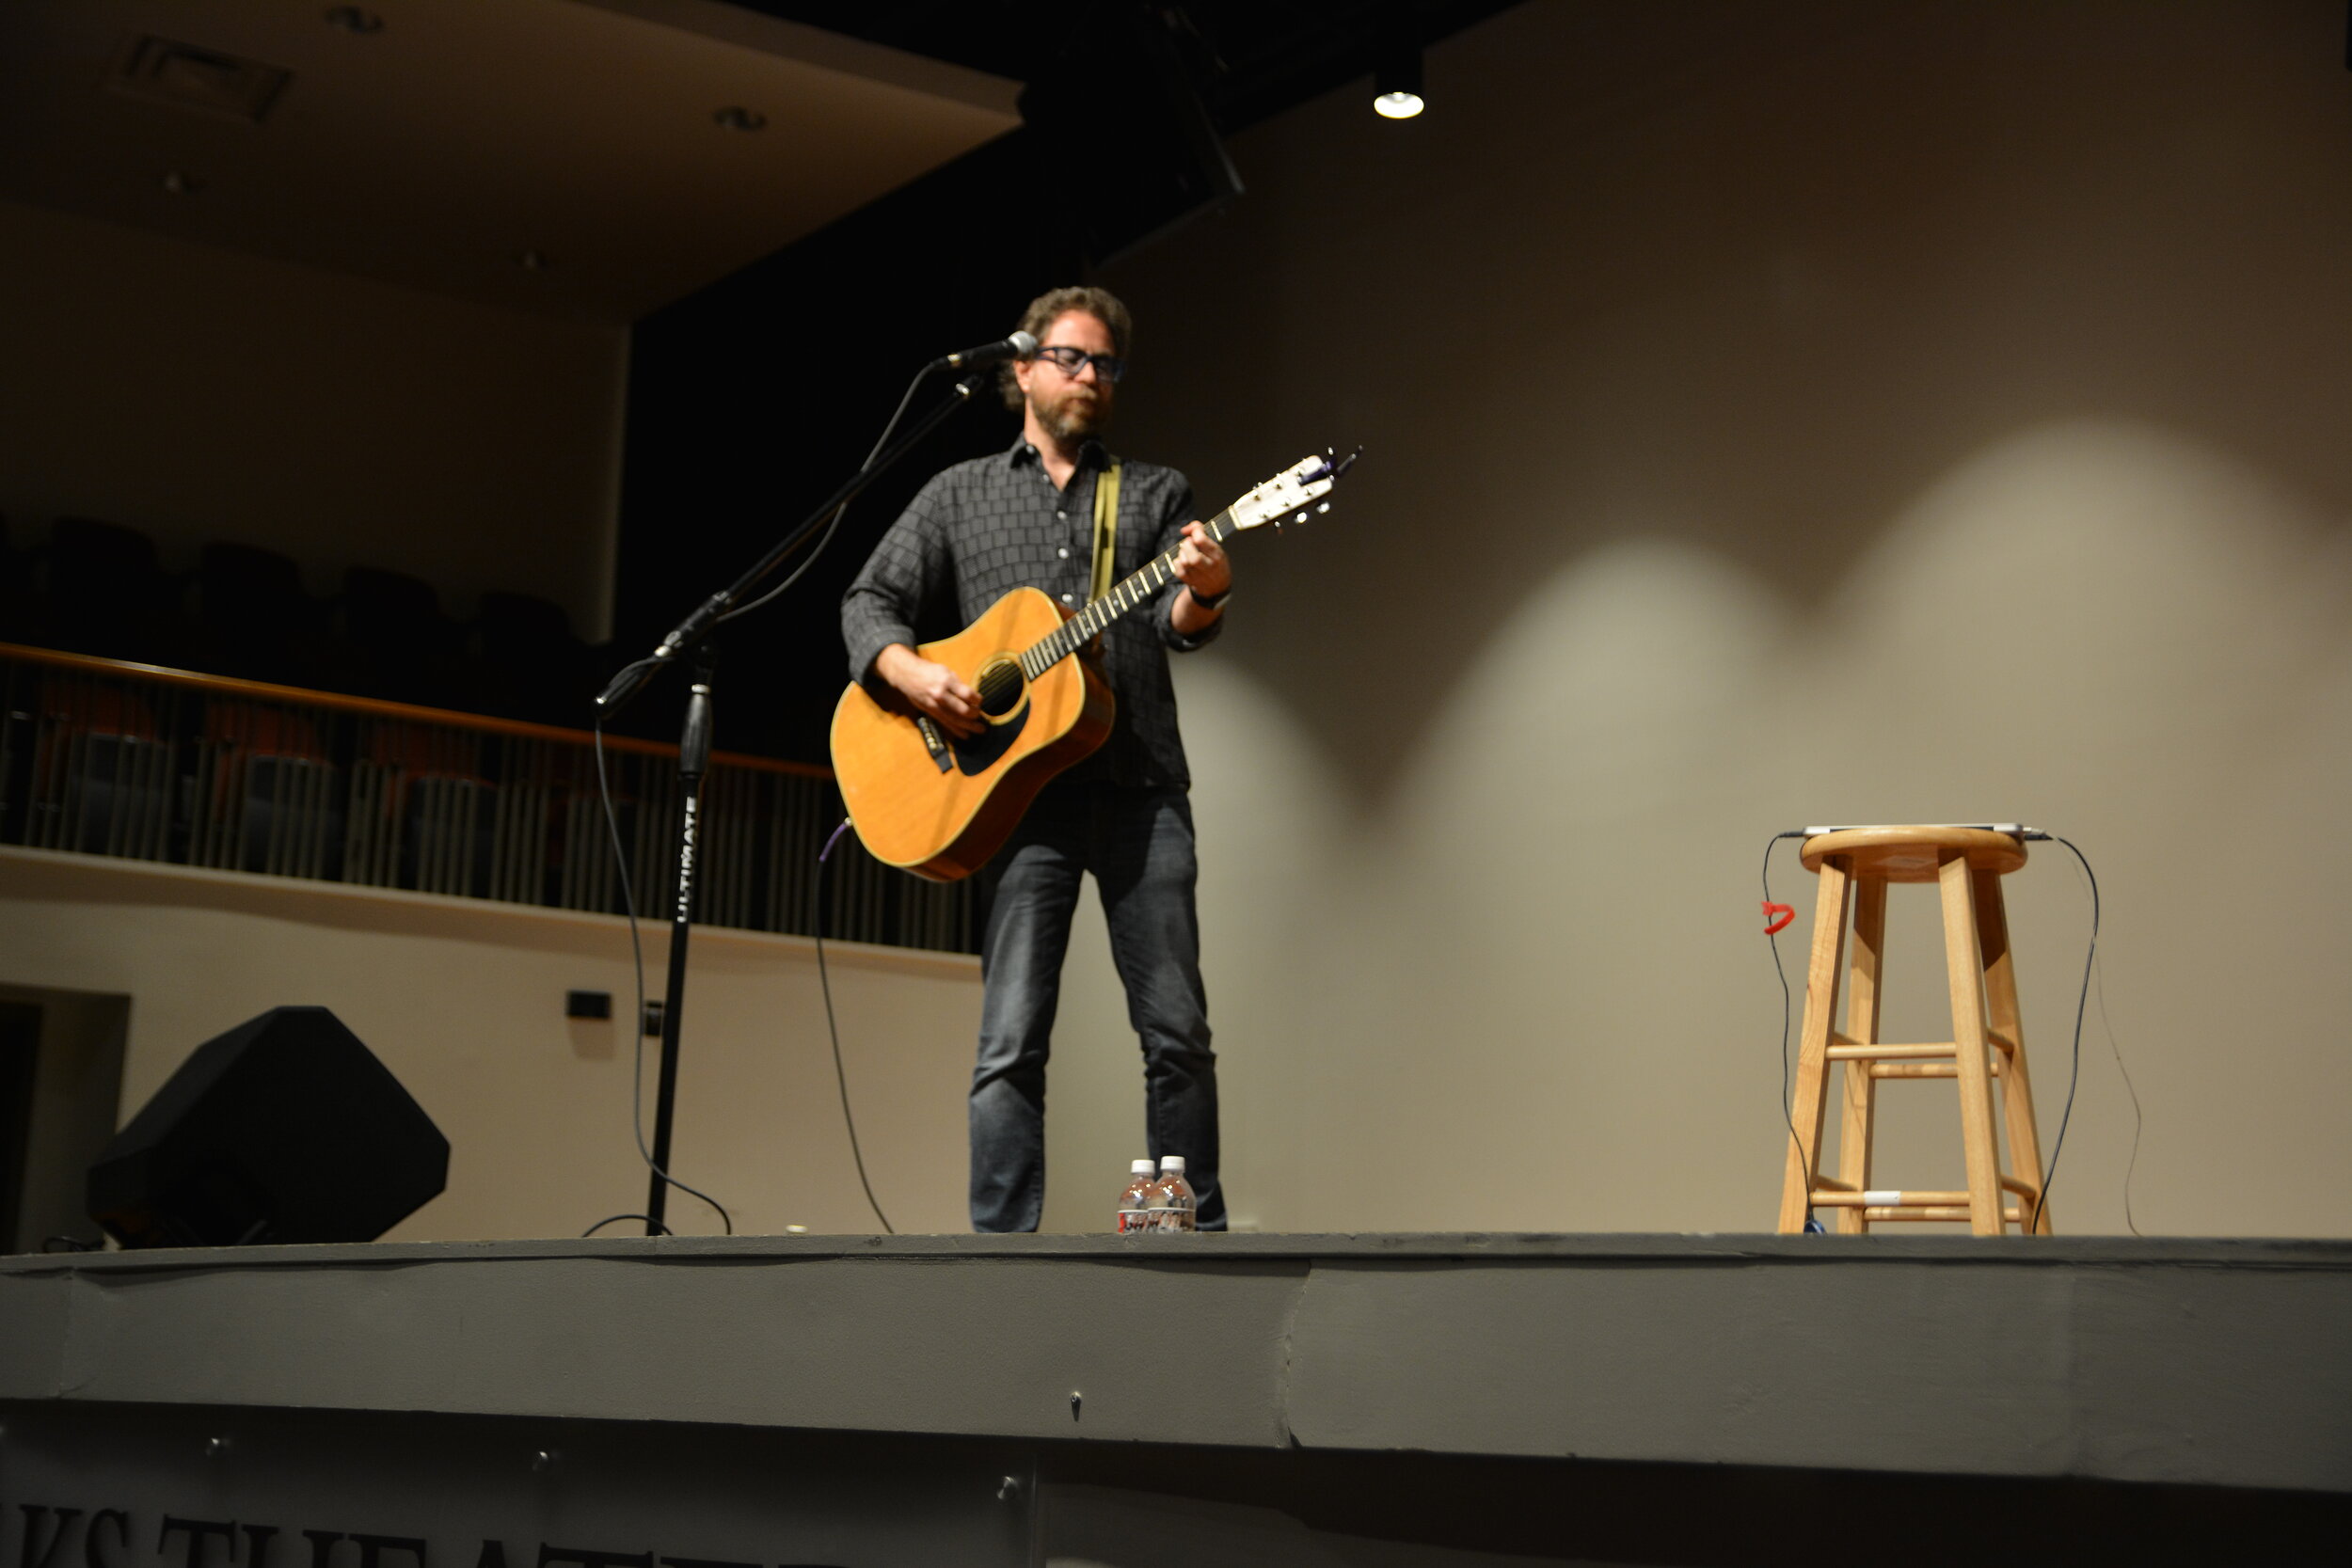 Jonathon Coutlon on stage with his guitar, a mike, and a stool